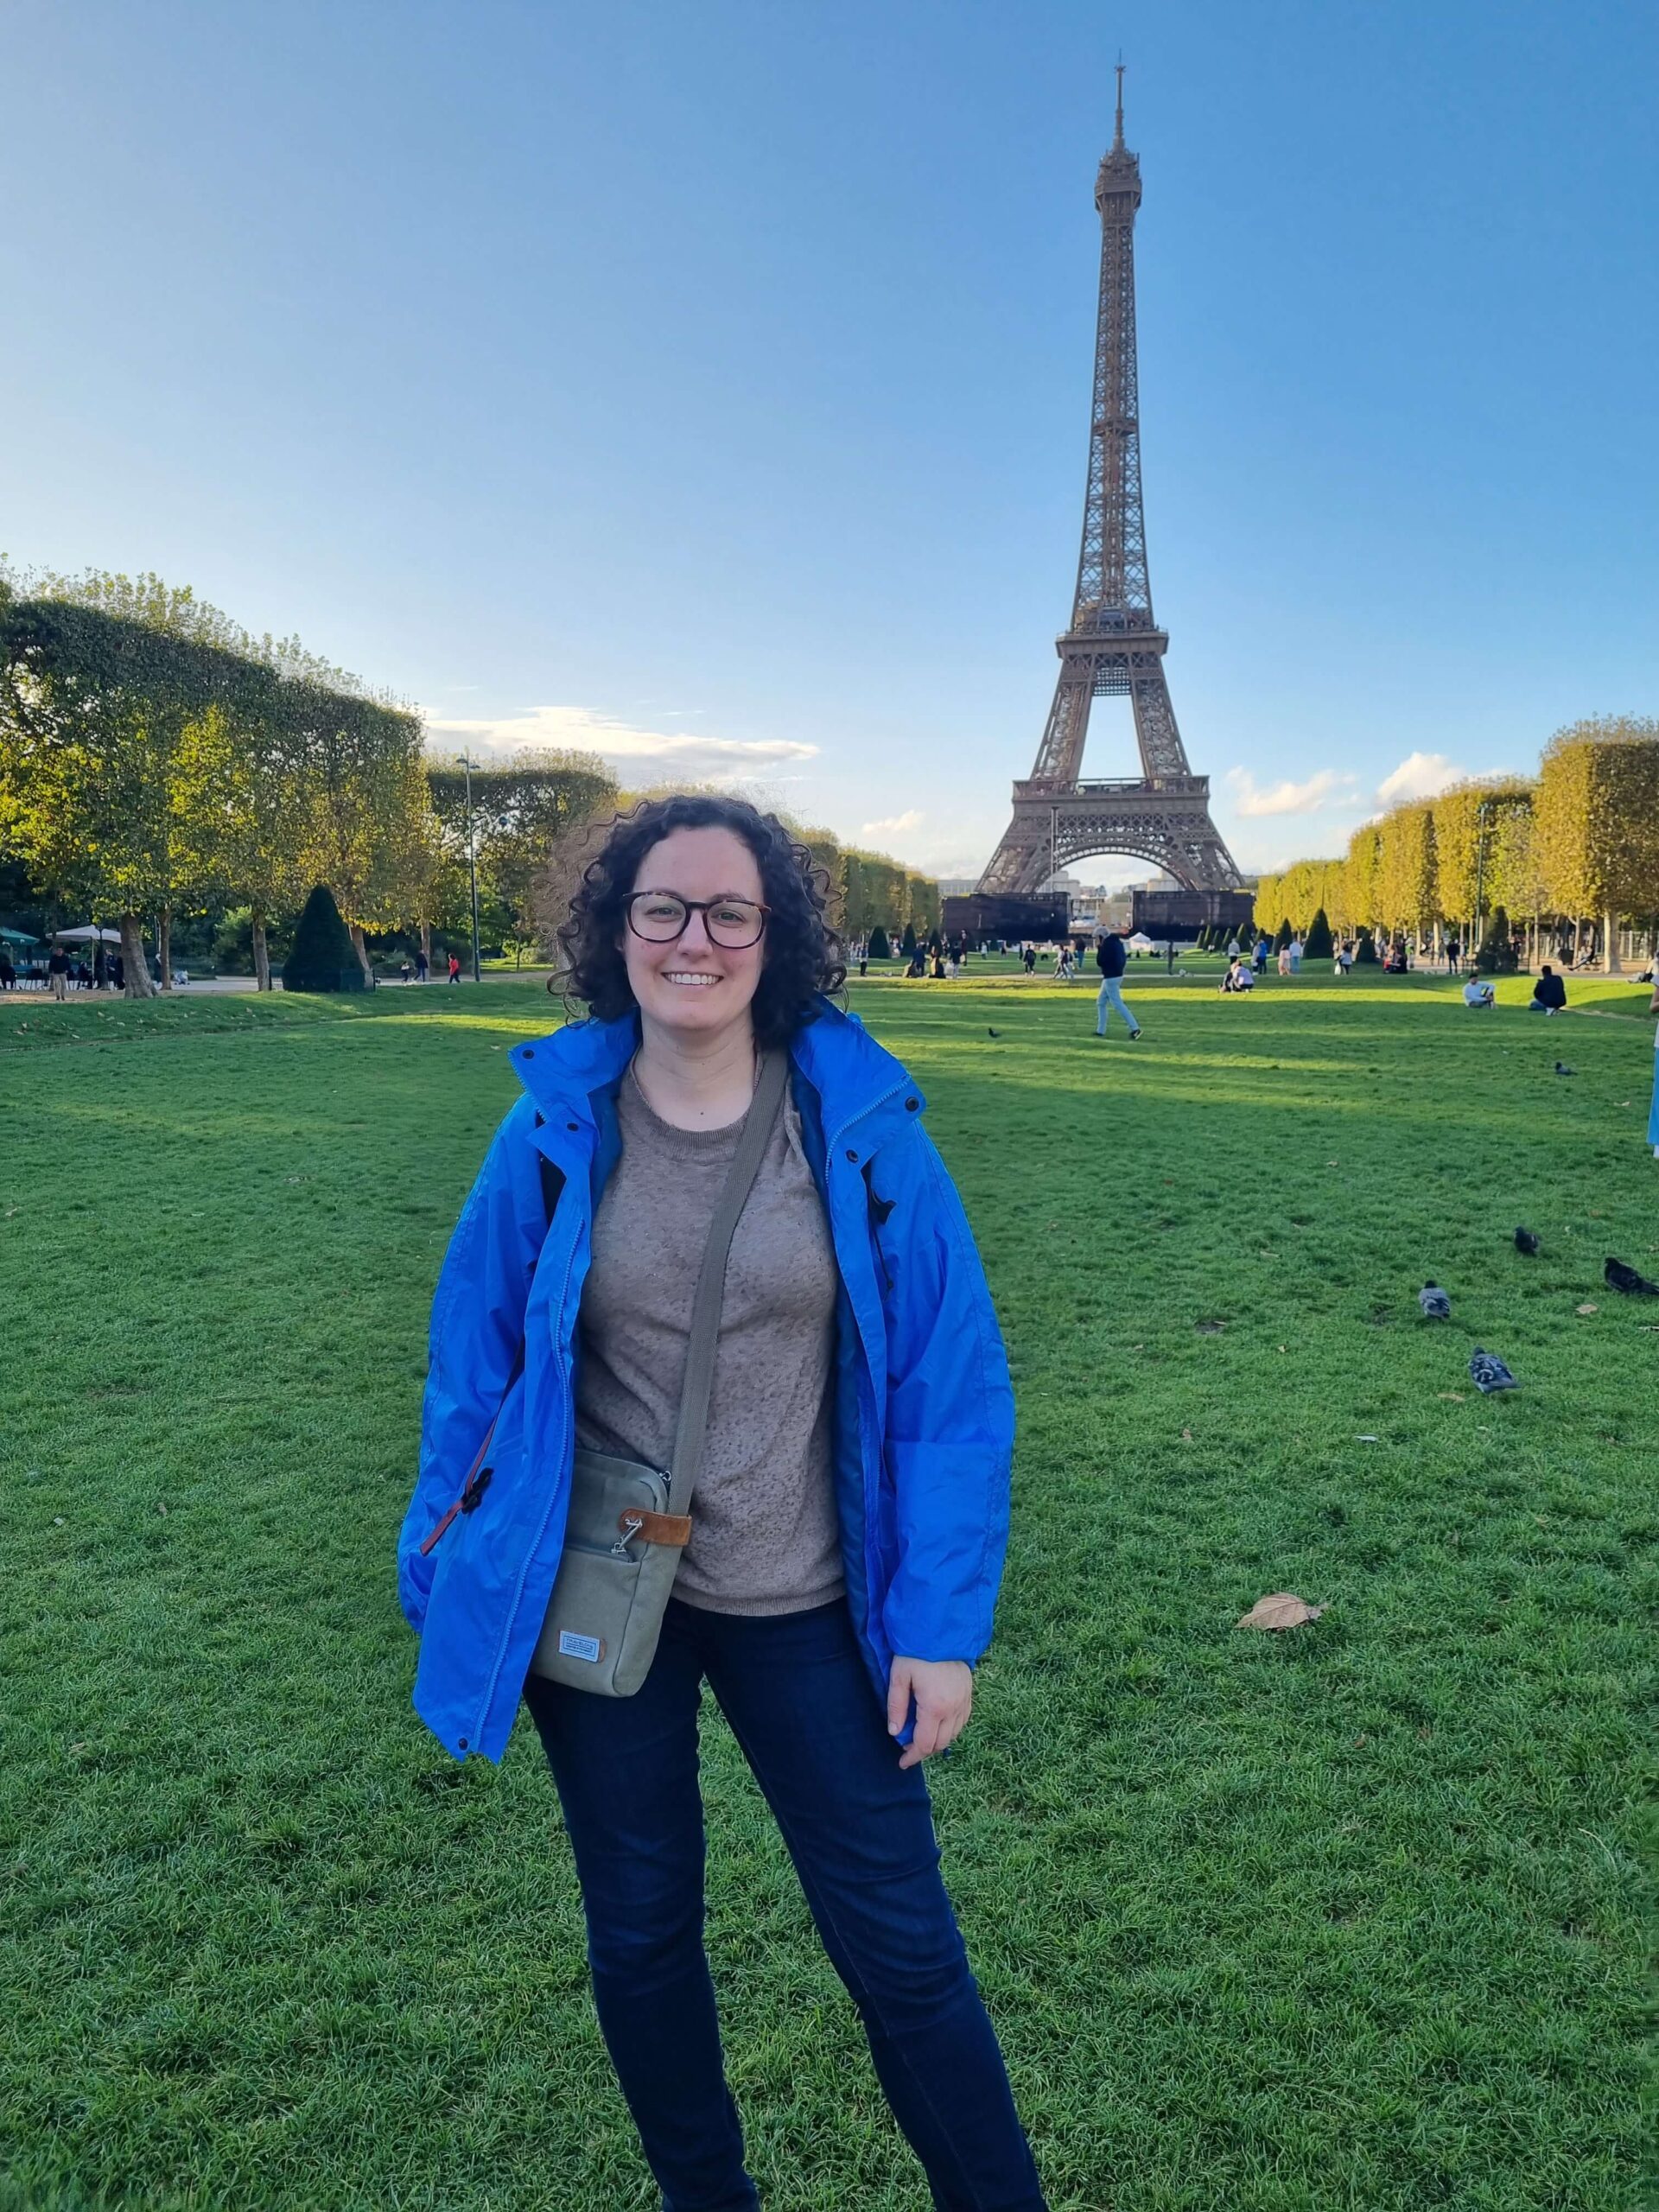 Charlotte is wearing a blue jacket, jeans and a brown top. She is standing on a grassy area in front of the Eiffel Tower, smiling.